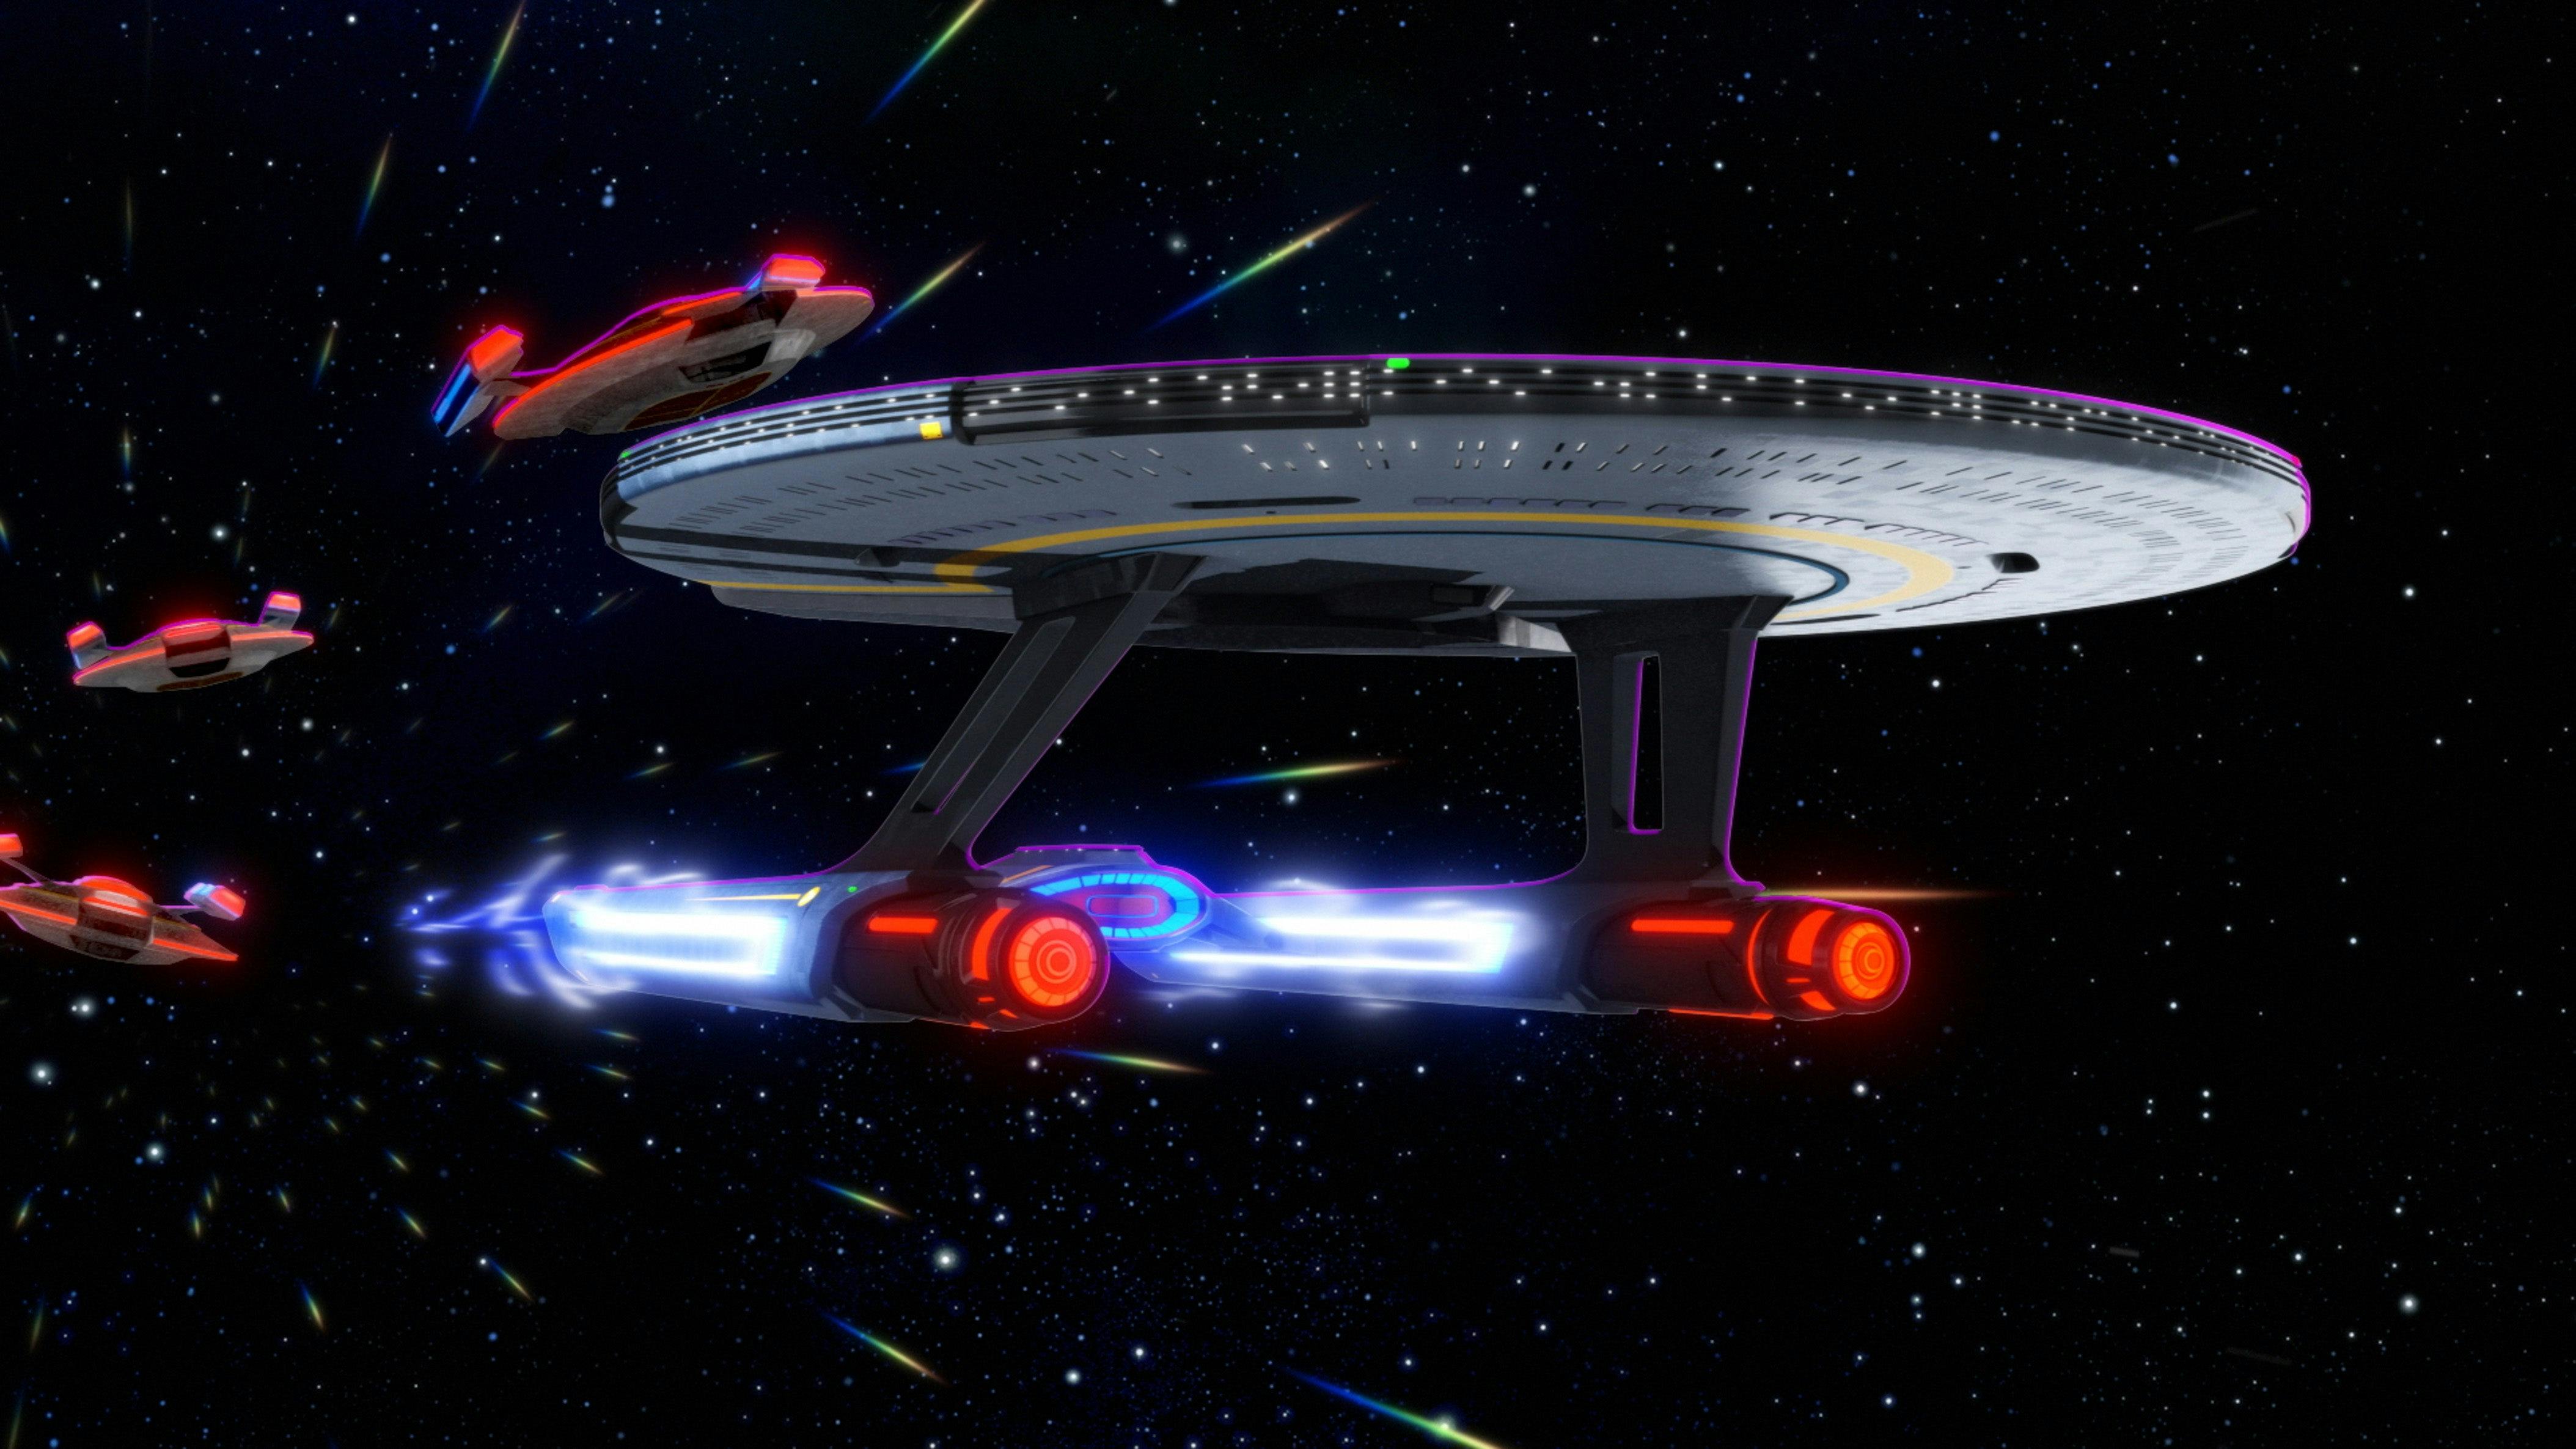 The Cerritos is chased by the Aledo and two Texas-class ships in Star Trek: Lower Decks